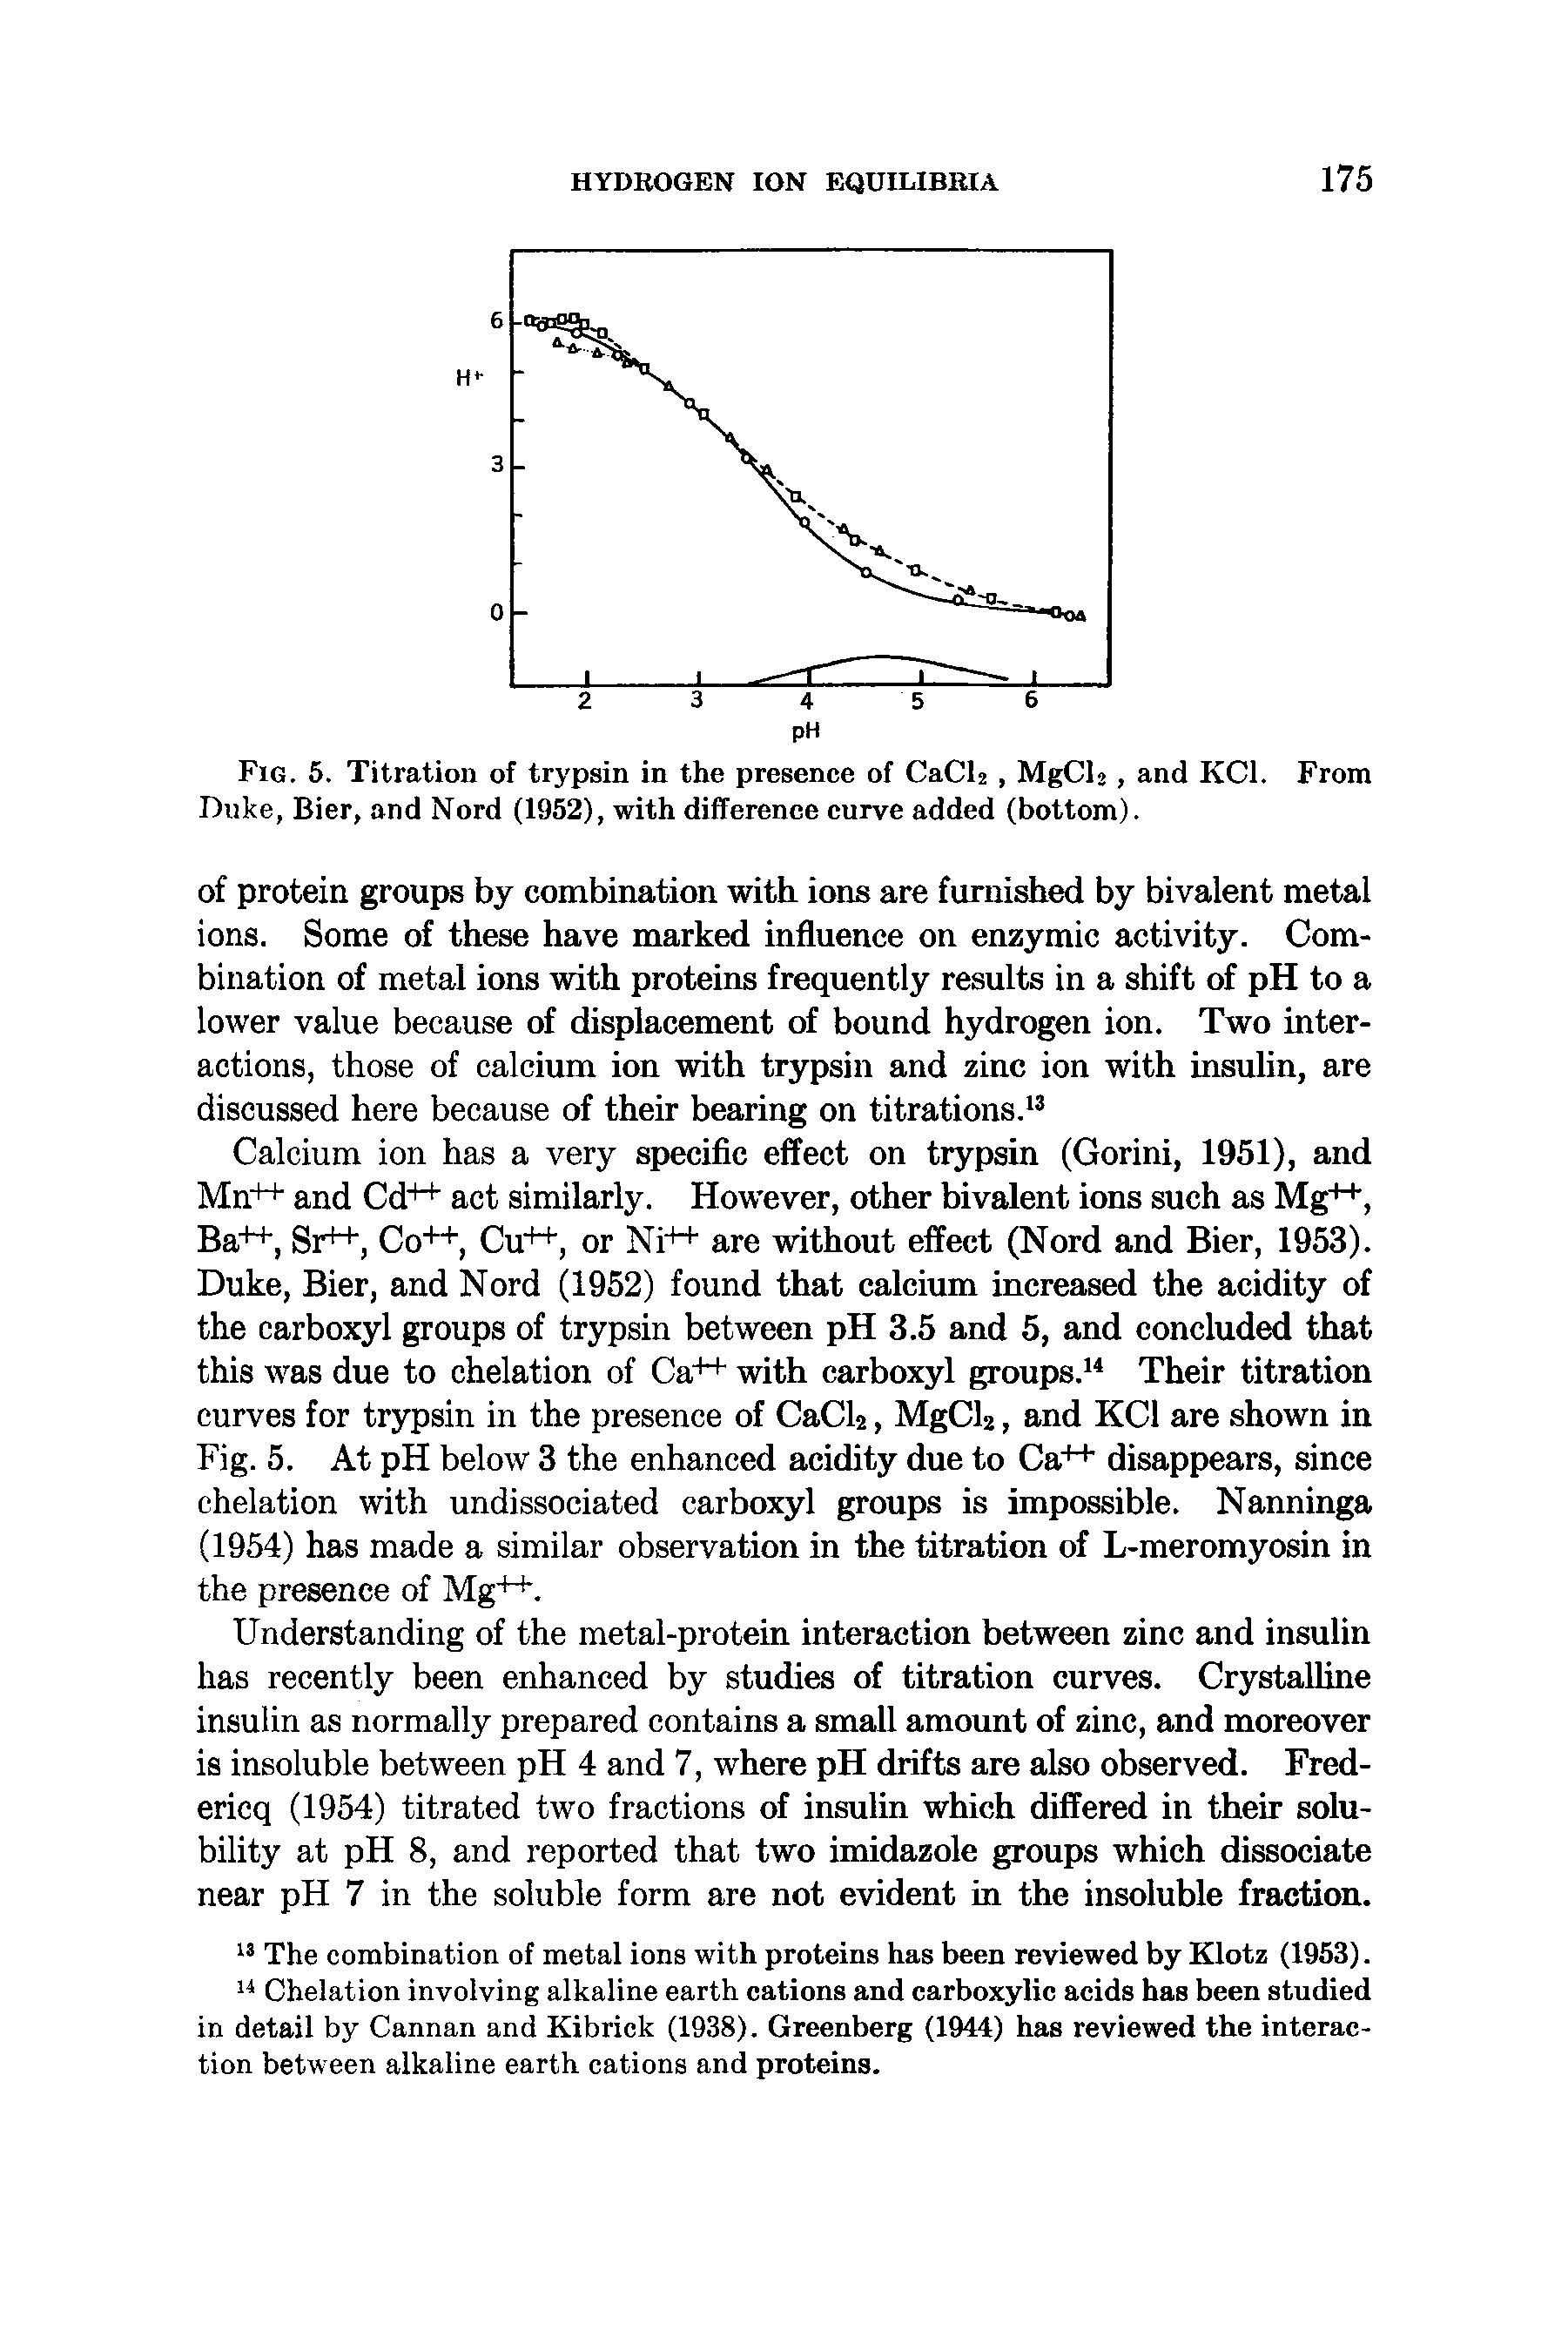 Fig. 5. Titration of trypsin in the presence of CaCh, MgCls, and KCl. From Duke, Bier, and Nord (1952), with difference curve added (bottom).